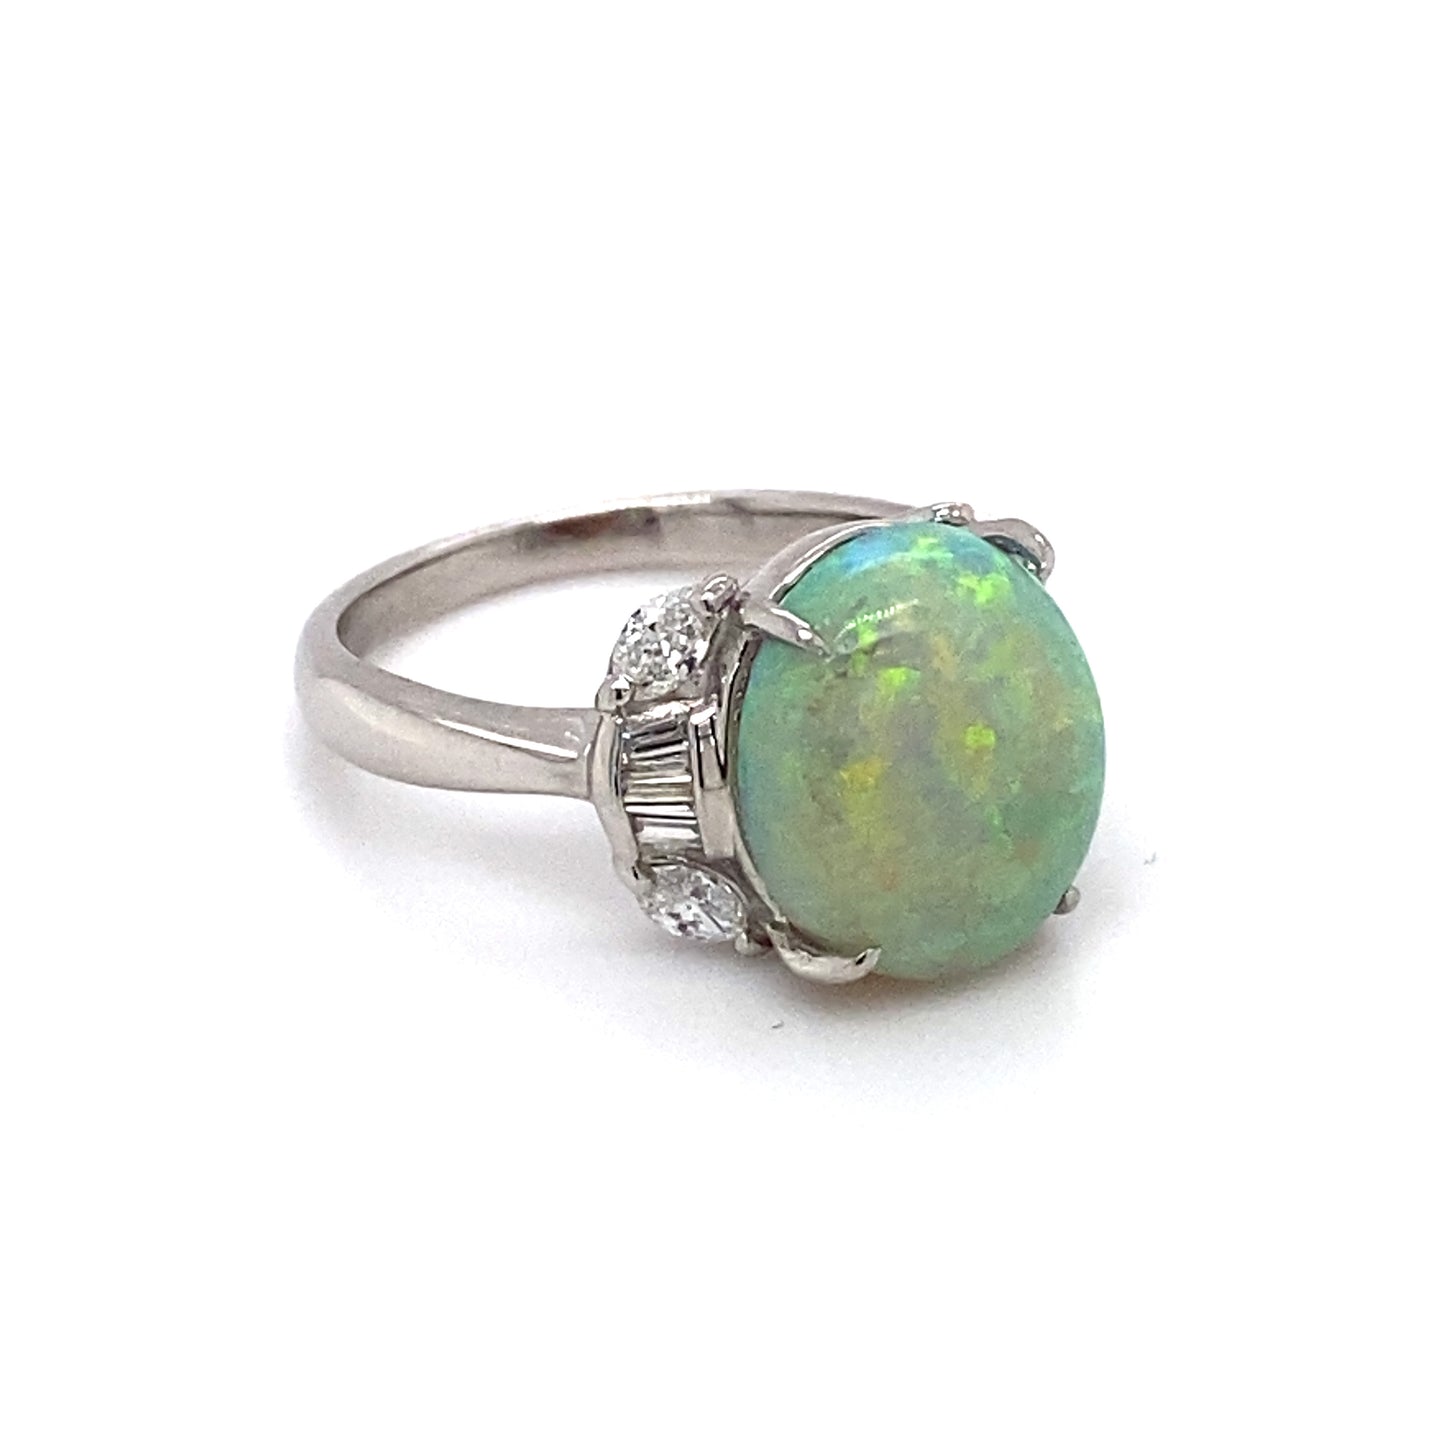 Circa 1950 4.41ct Opal and Diamond Ring in Platinum